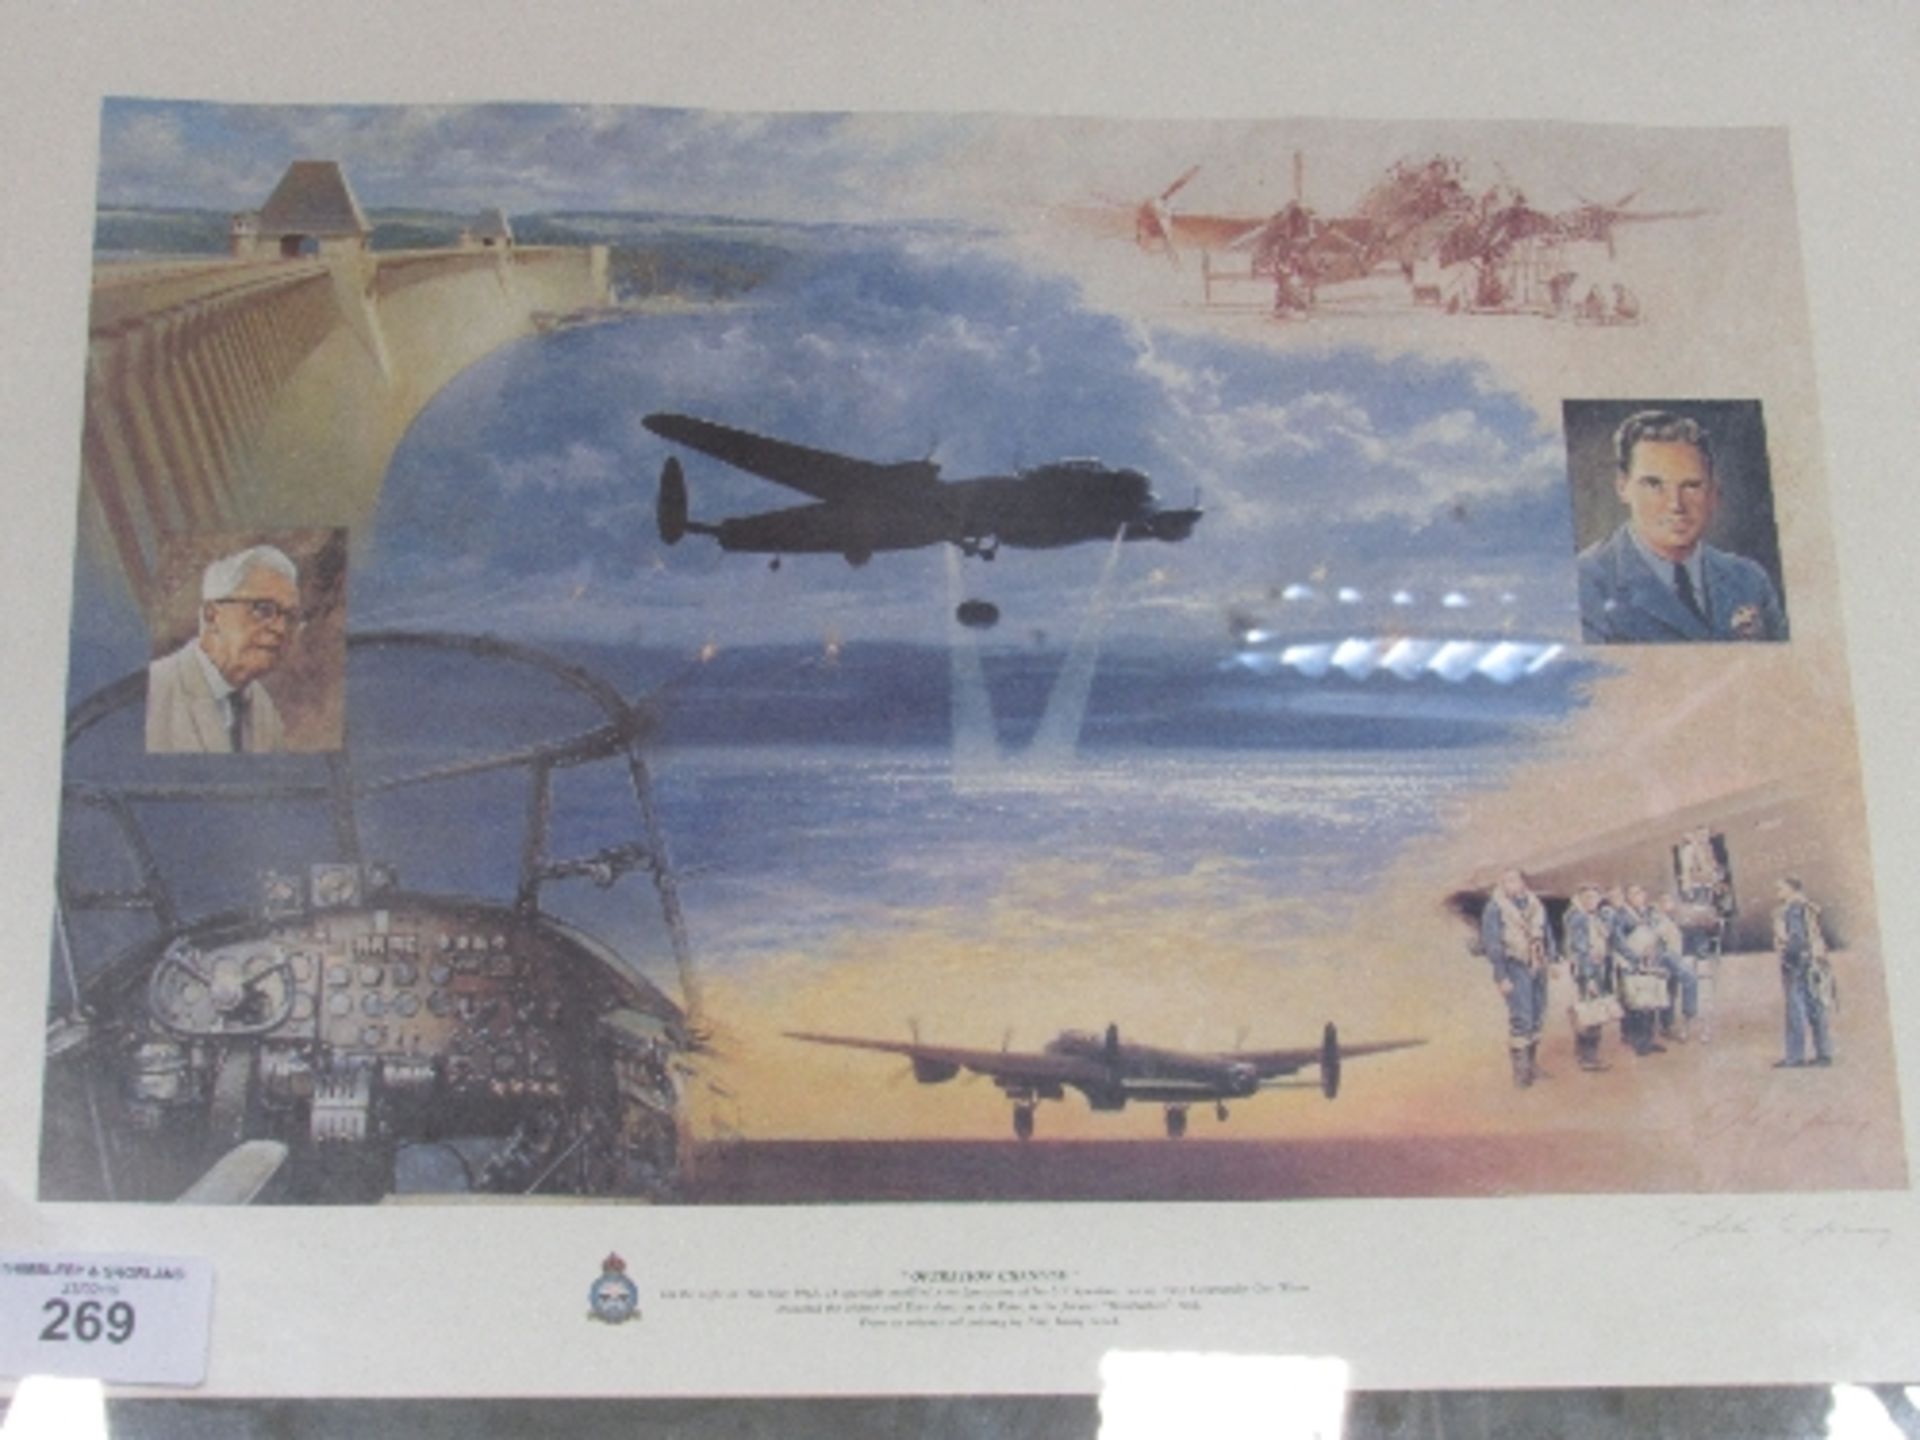 Framed & glazed print, Dambusters 'Operation Chastise', signed by the artist, John Young, 24inches x